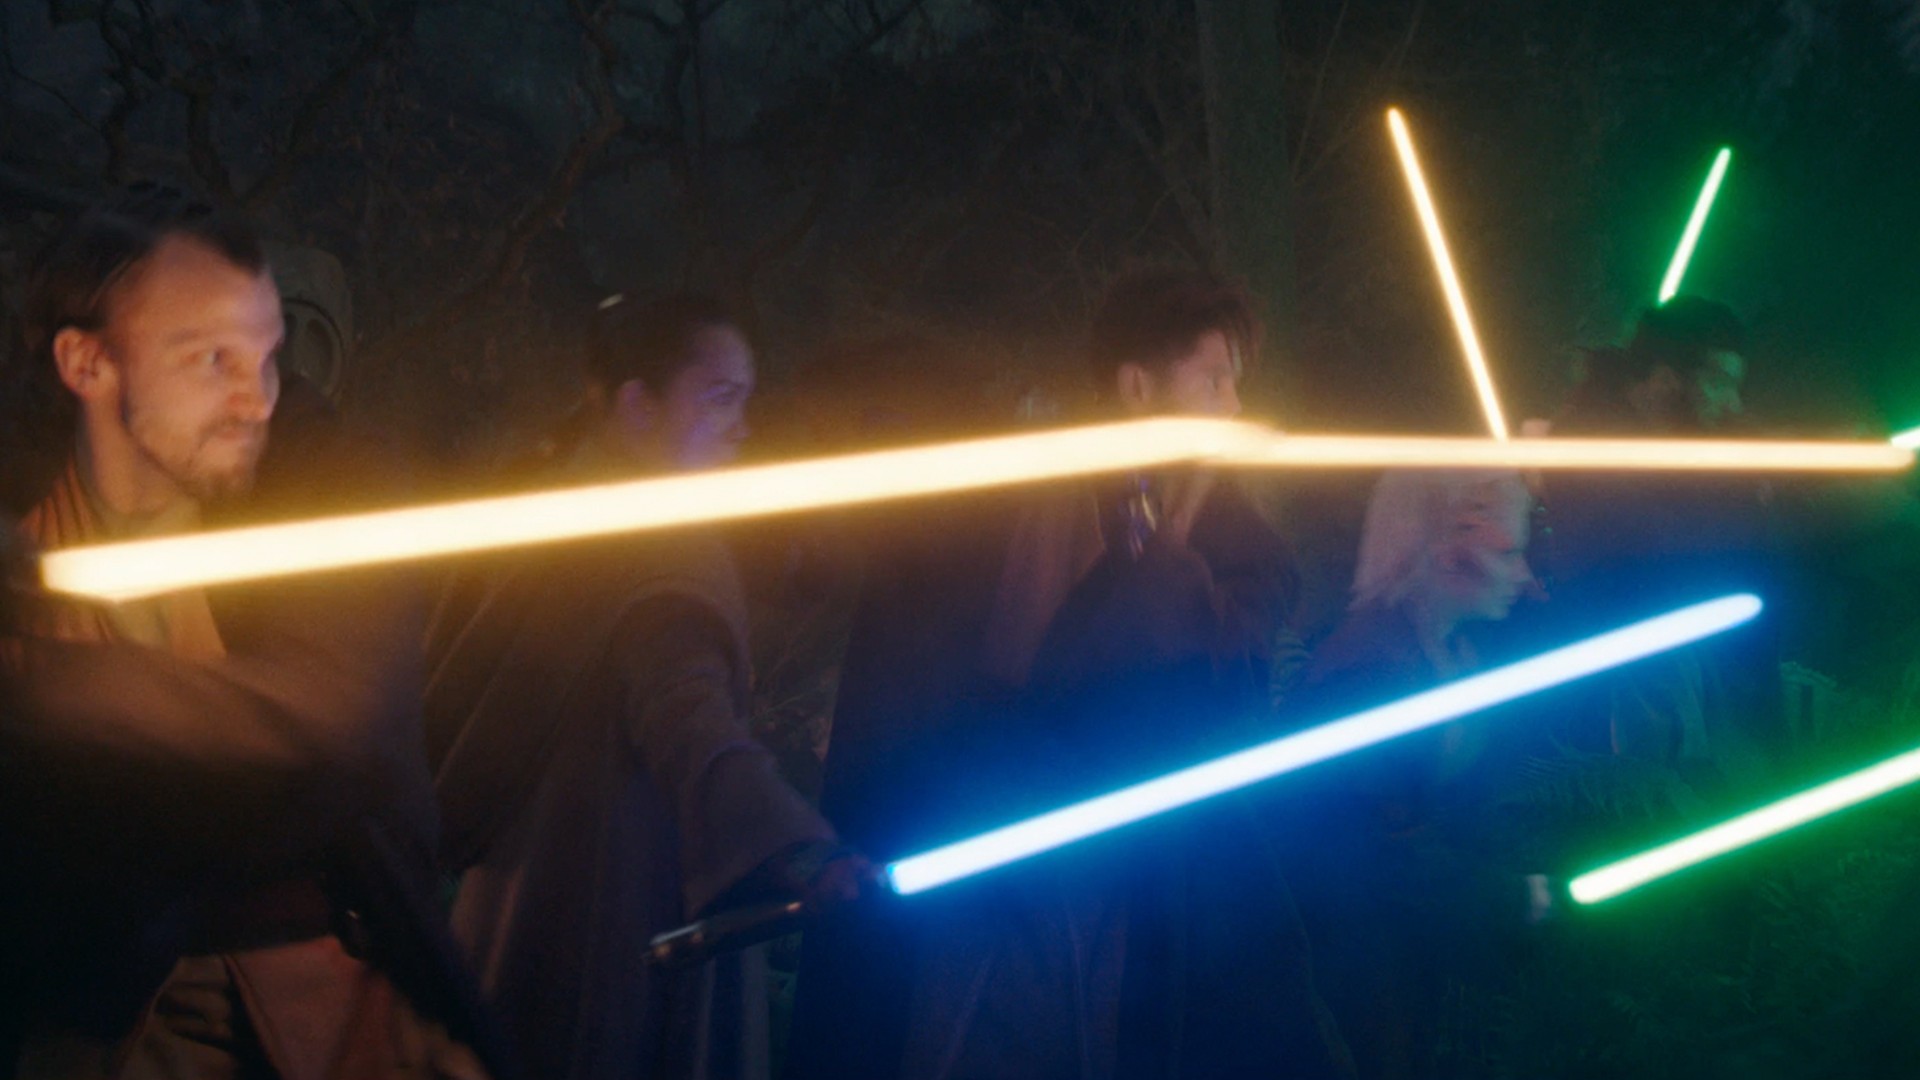 people in robes swing colorful laser swords at one another